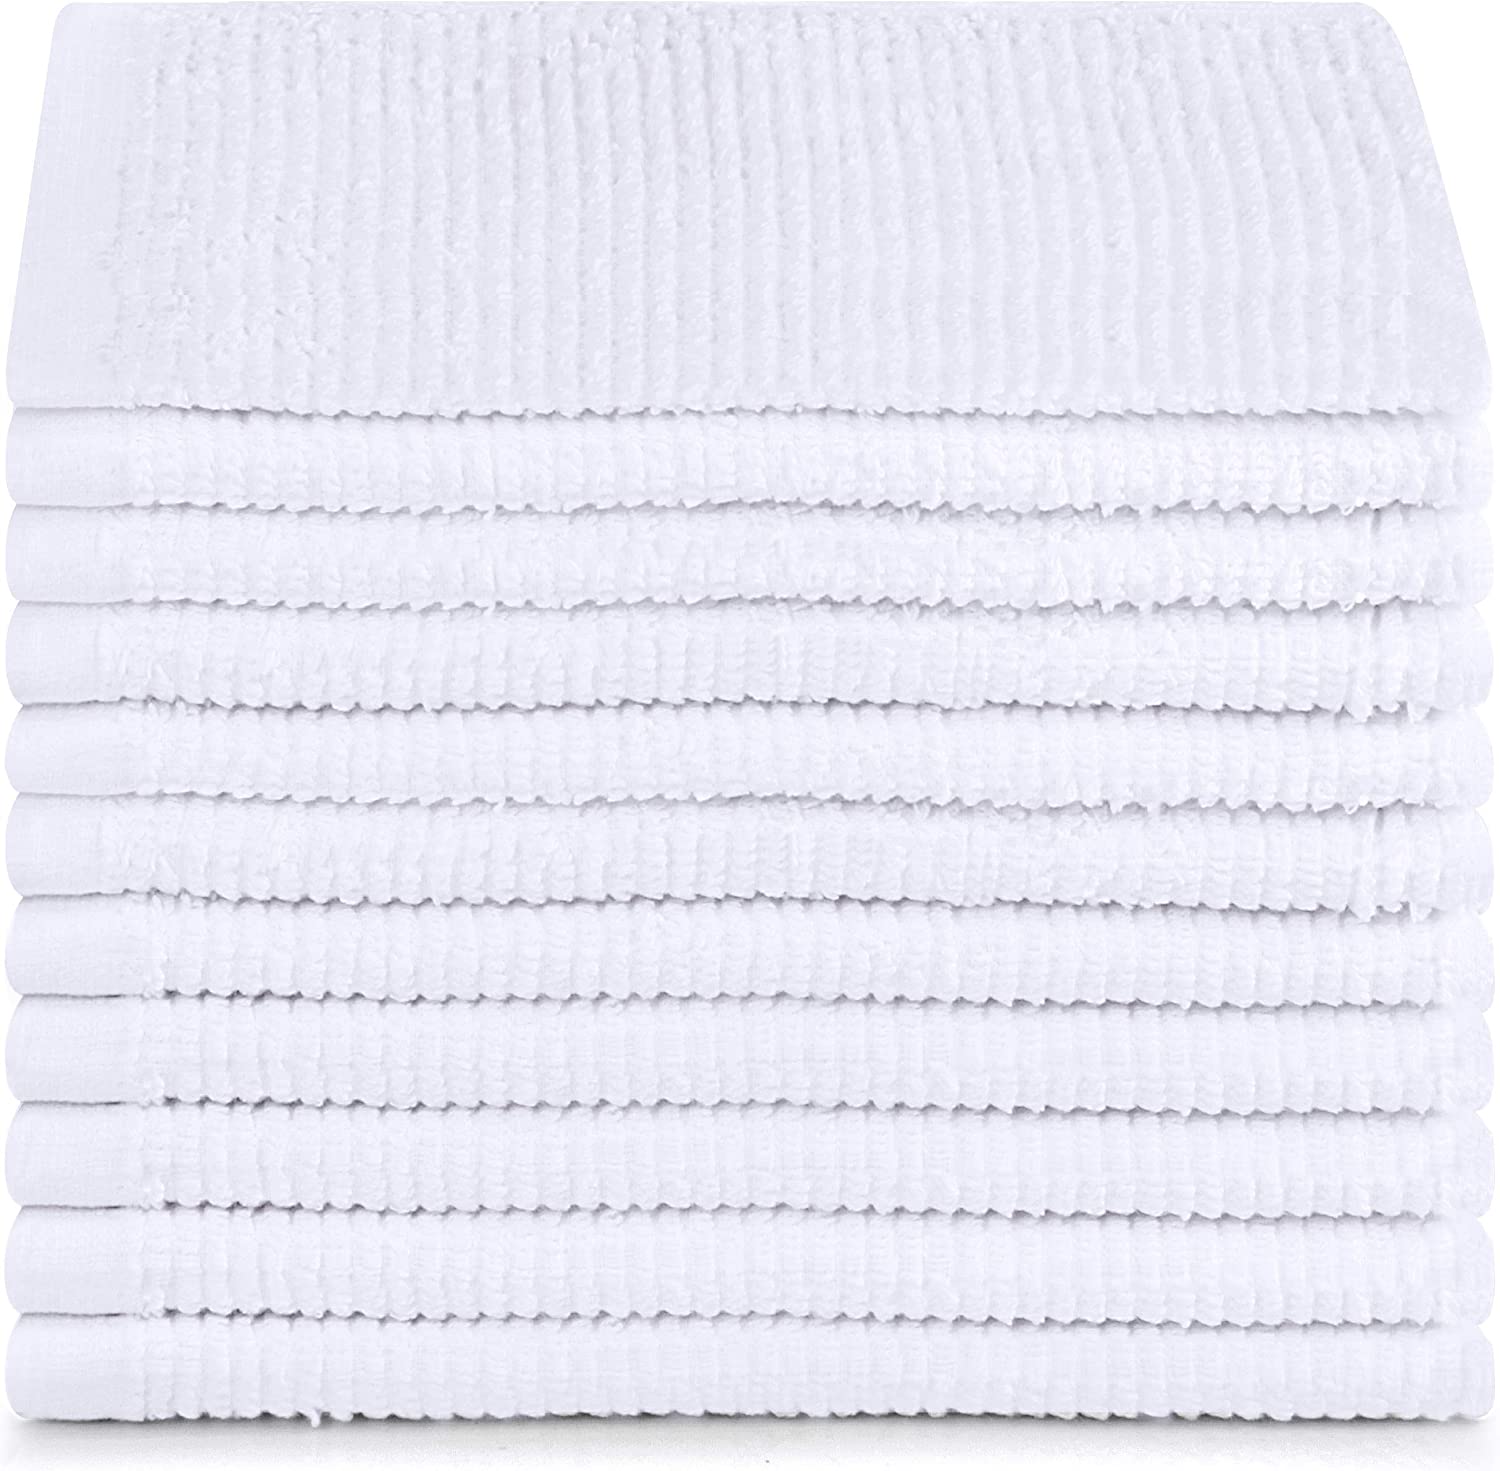 Utopia Towels Kitchen Bar Mops Towels, Pack of 12 Towels - 16 x 19 Inches,  100% Cotton Super Absorbent Black Bar Towels, Multi-Purpose Cleaning Towels